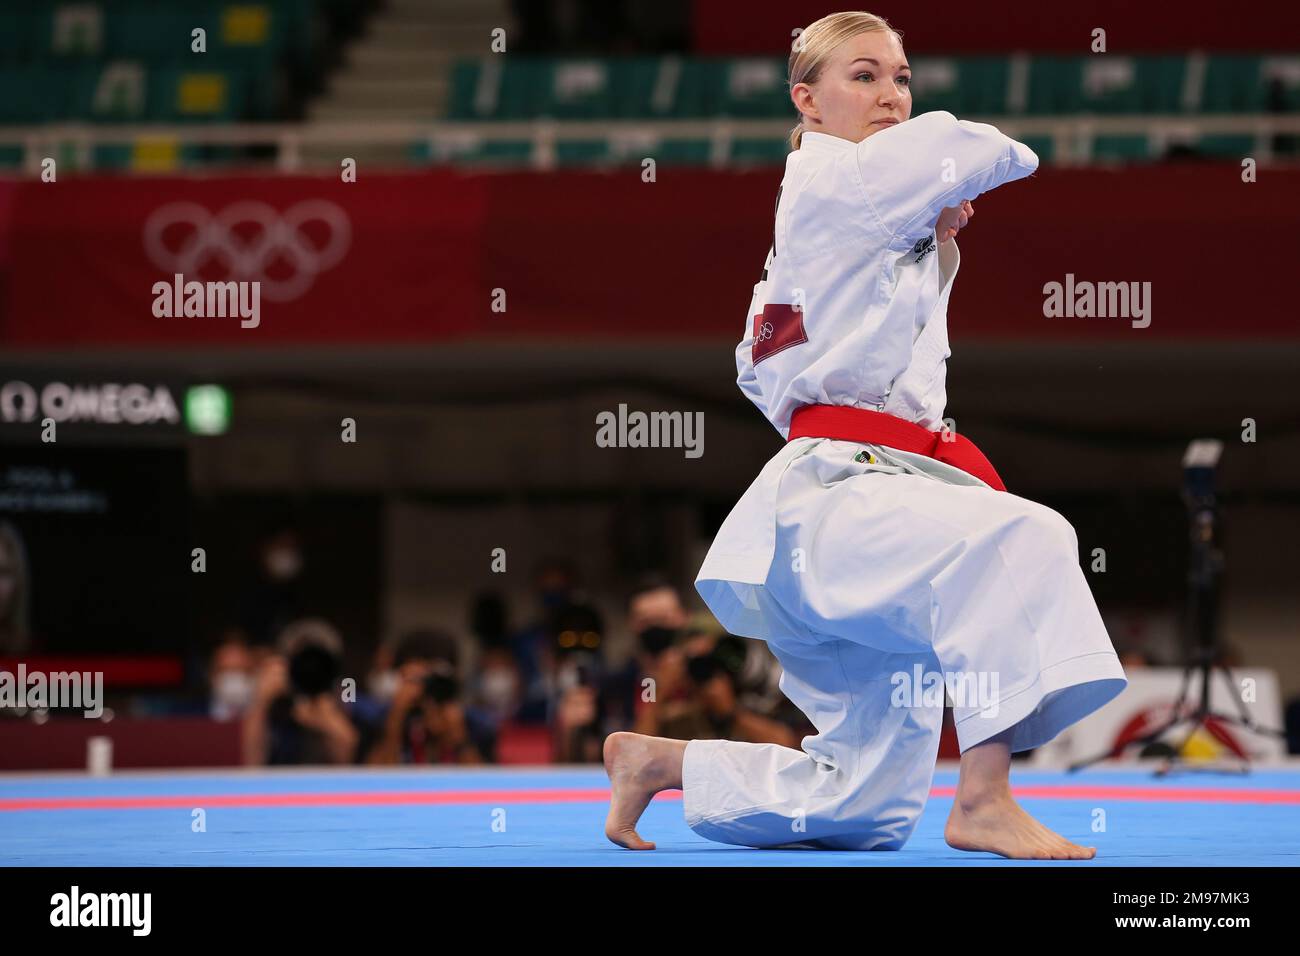 AUG 5, 2021 - TOKYO, JAPAN: Jasmine Jüttner of Germany competes in the Women's Kata Elimination Round at the Tokyo 2020 Olympic Games (Photo by Mickael Chavet/RX) Stock Photo